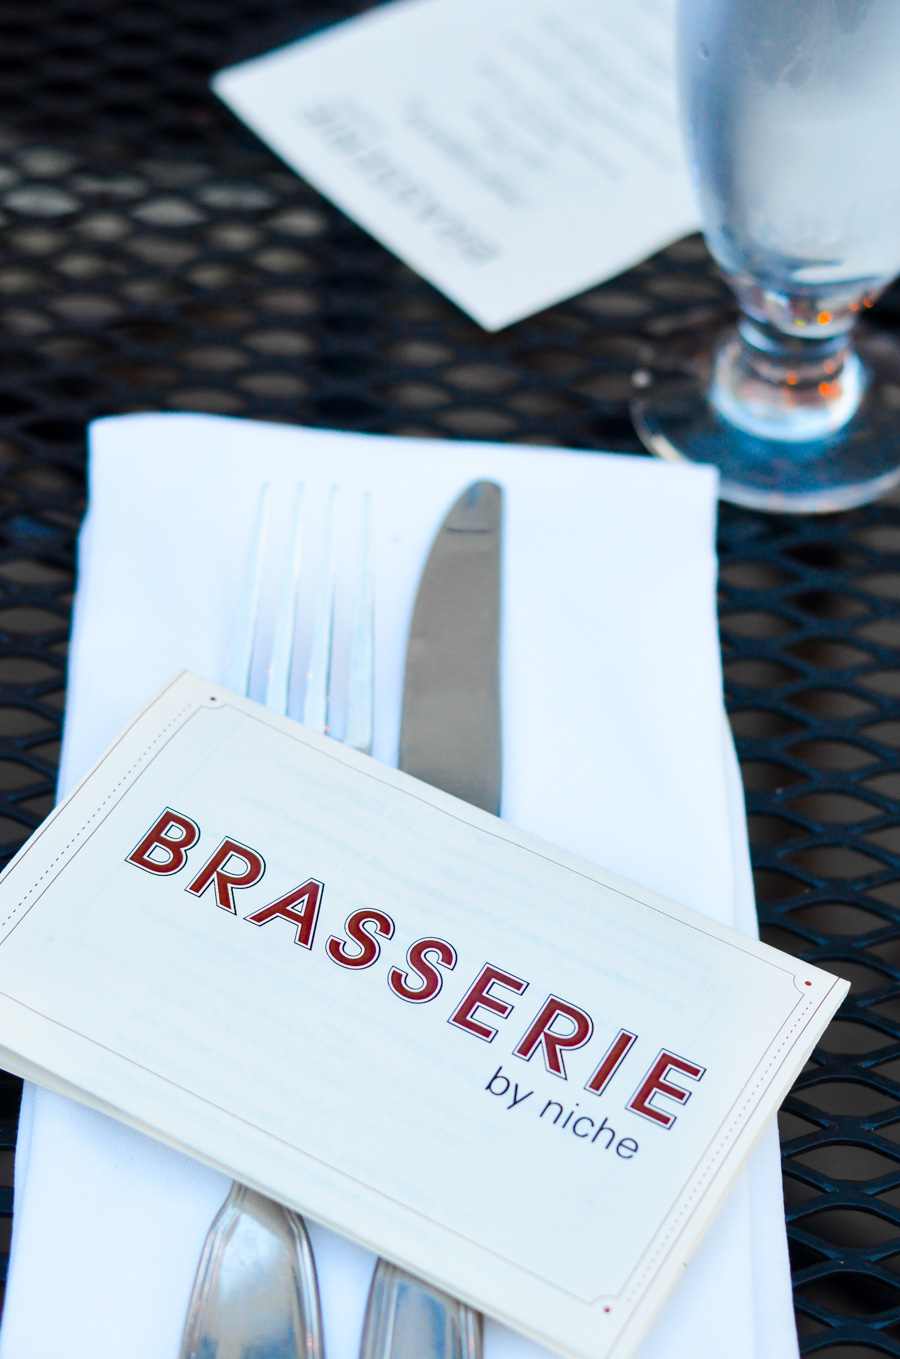 Where to Eat in St. Louis | Restaurant Guide | Brasserie by Niche